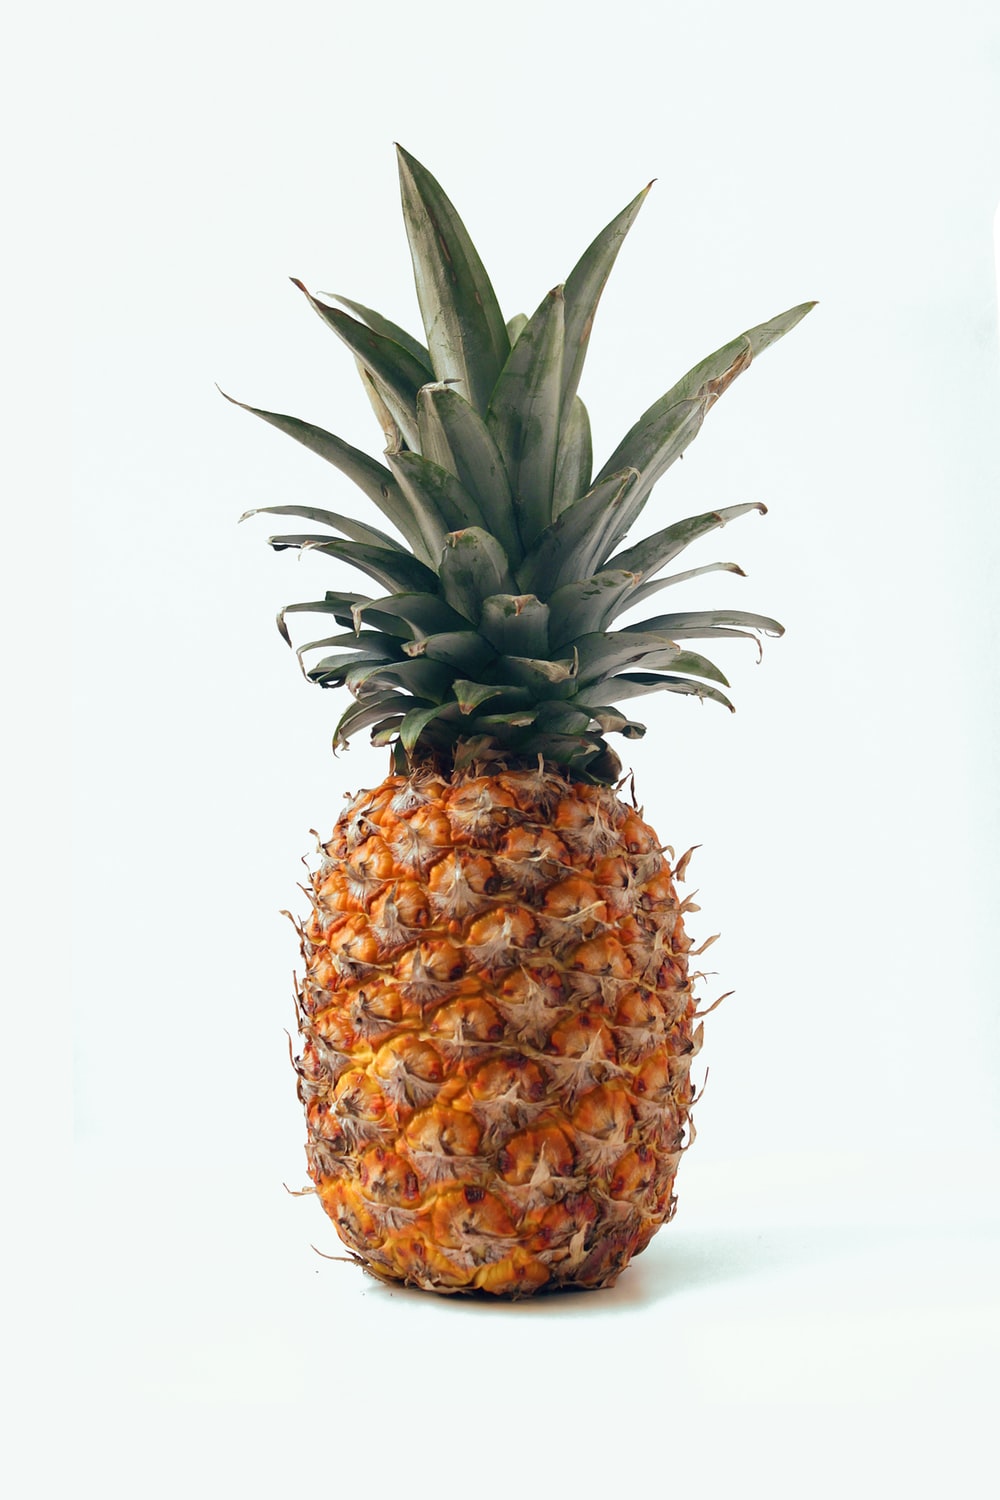 900 Pineapple Background Images Download HD Backgrounds on